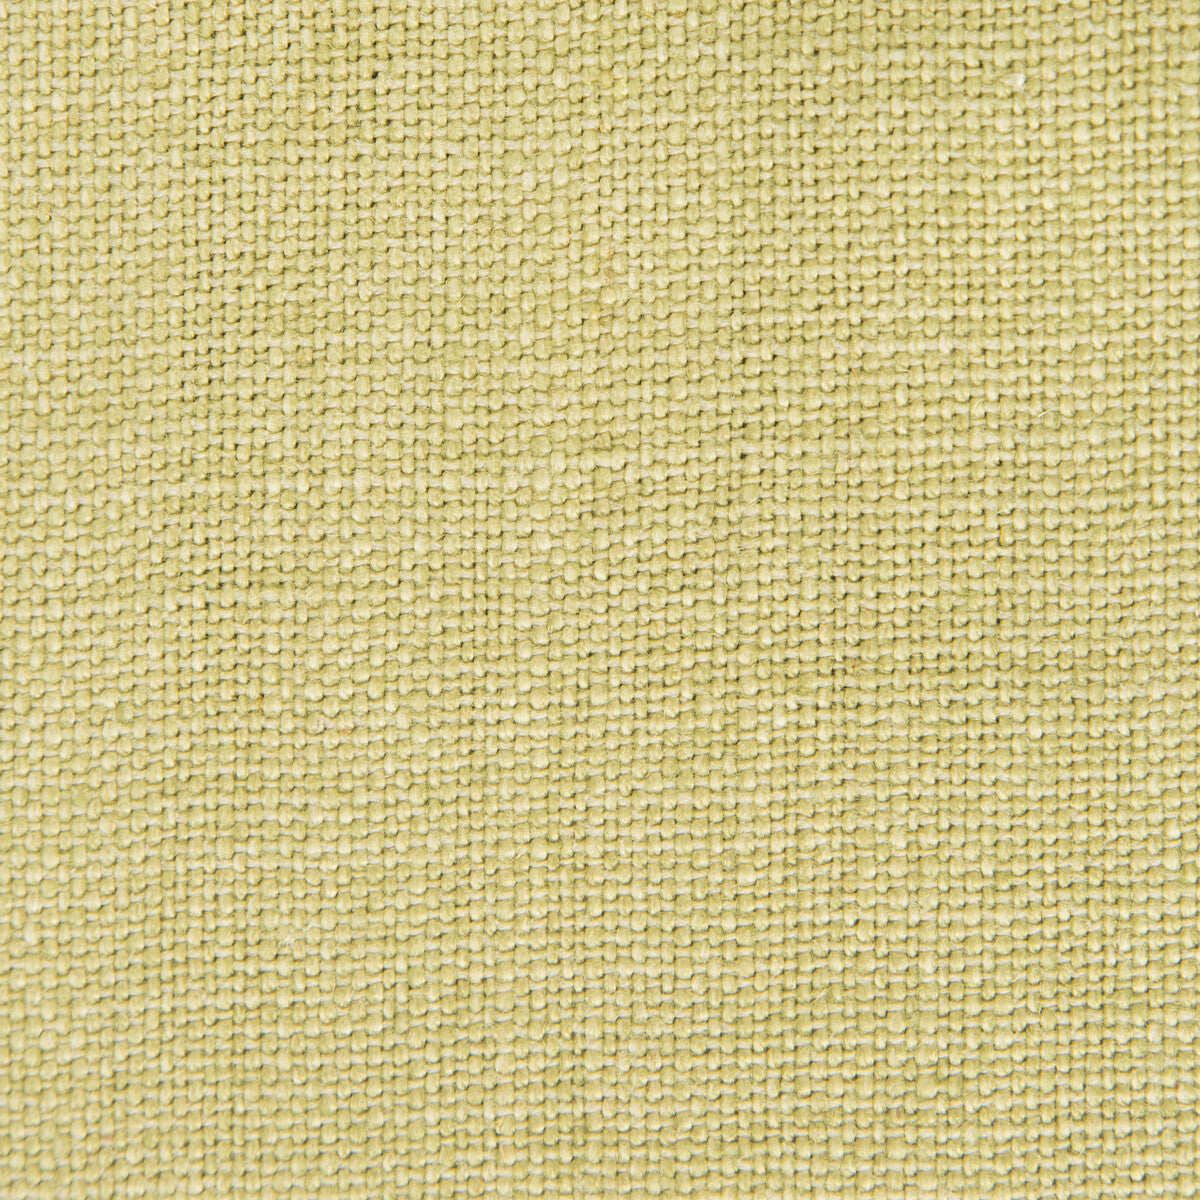 Nicaragua fabric in verde claro color - pattern GDT5239.011.0 - by Gaston y Daniela in the Basics collection